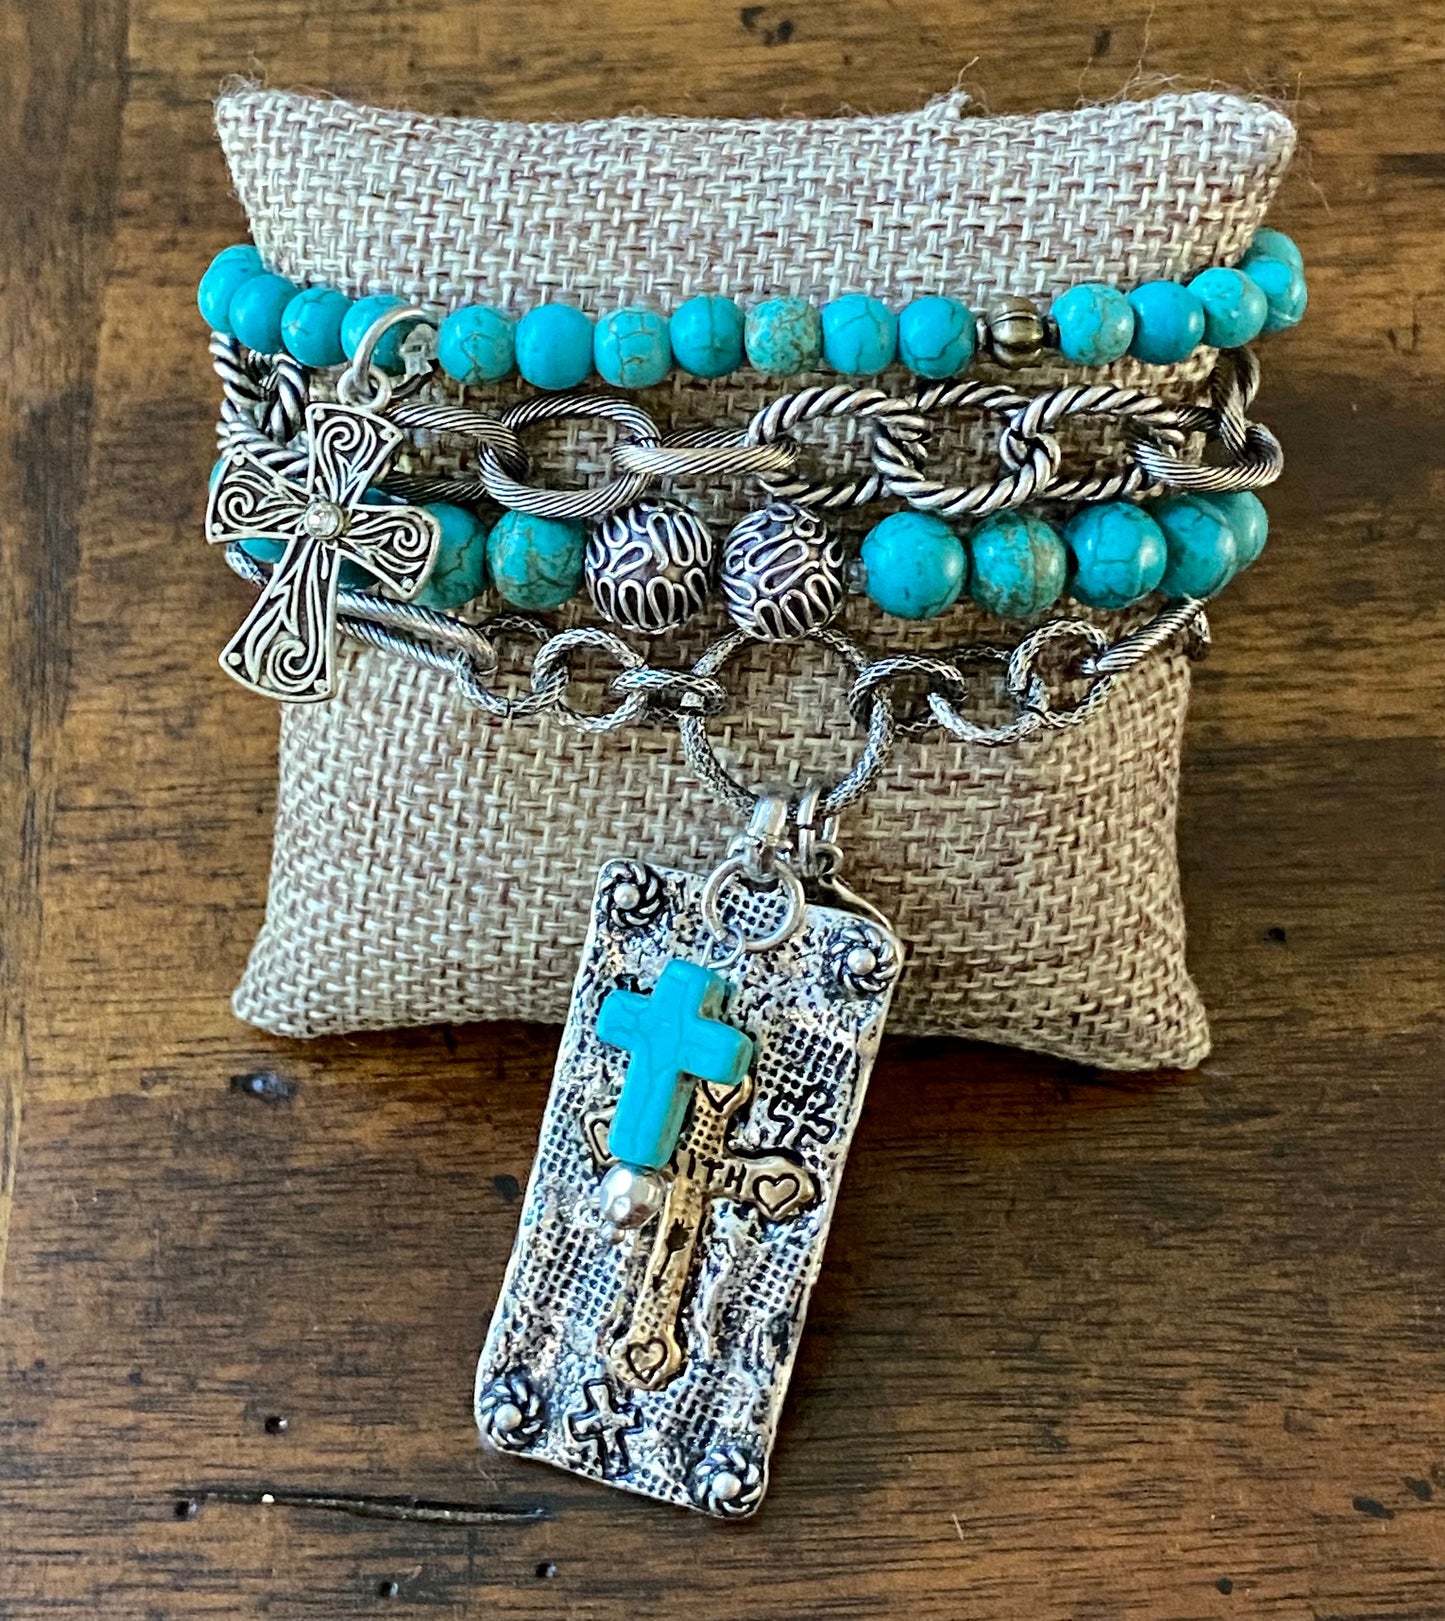 Antique Silver and Turquoise Bracelet Stack